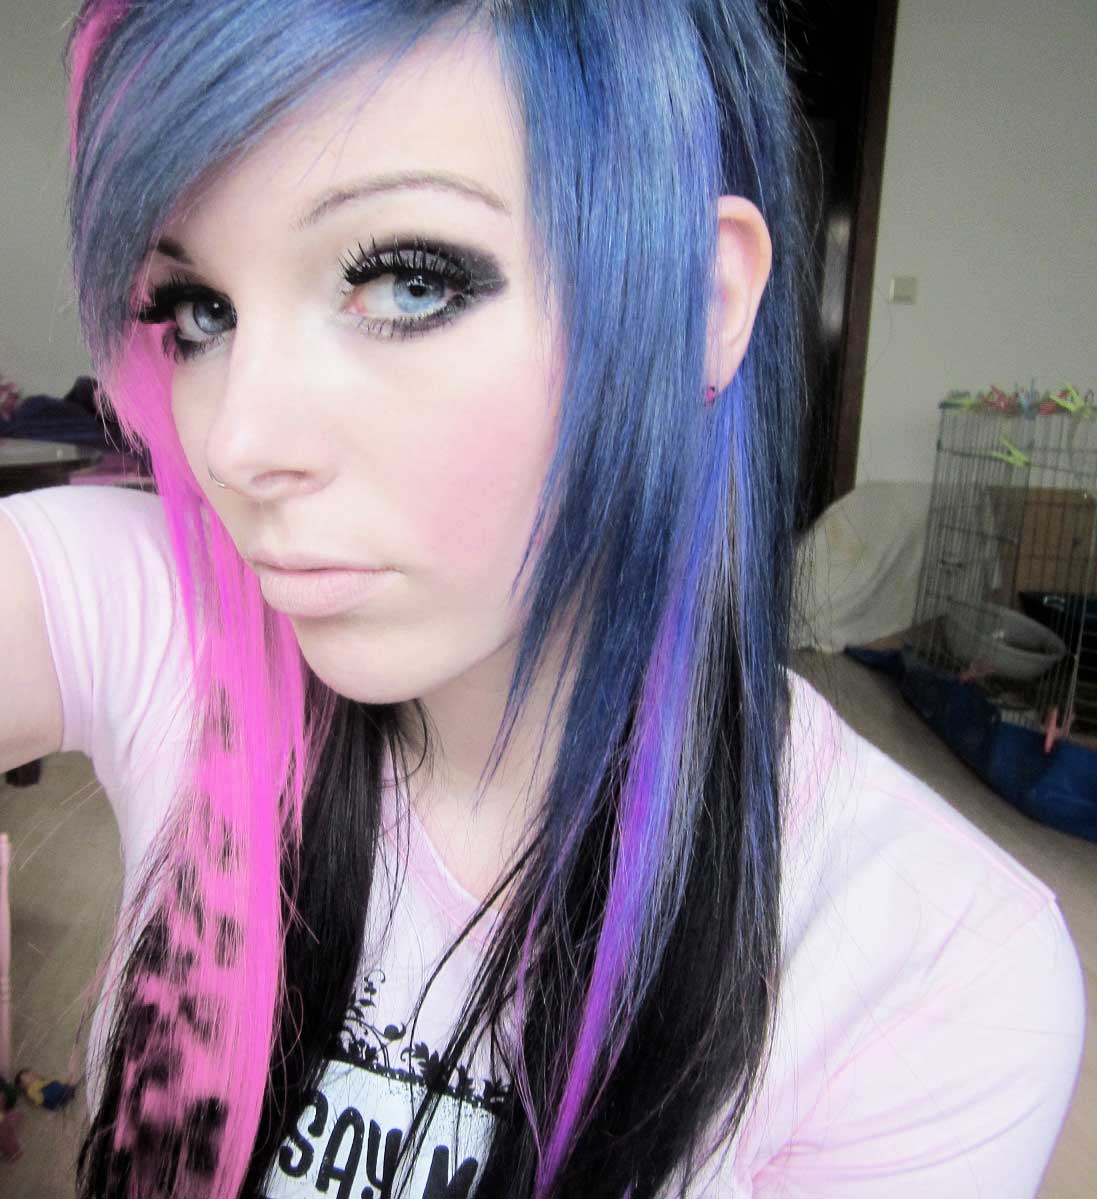 Emo Hairstyles An Expression Of Creative Adolescence Culture Top